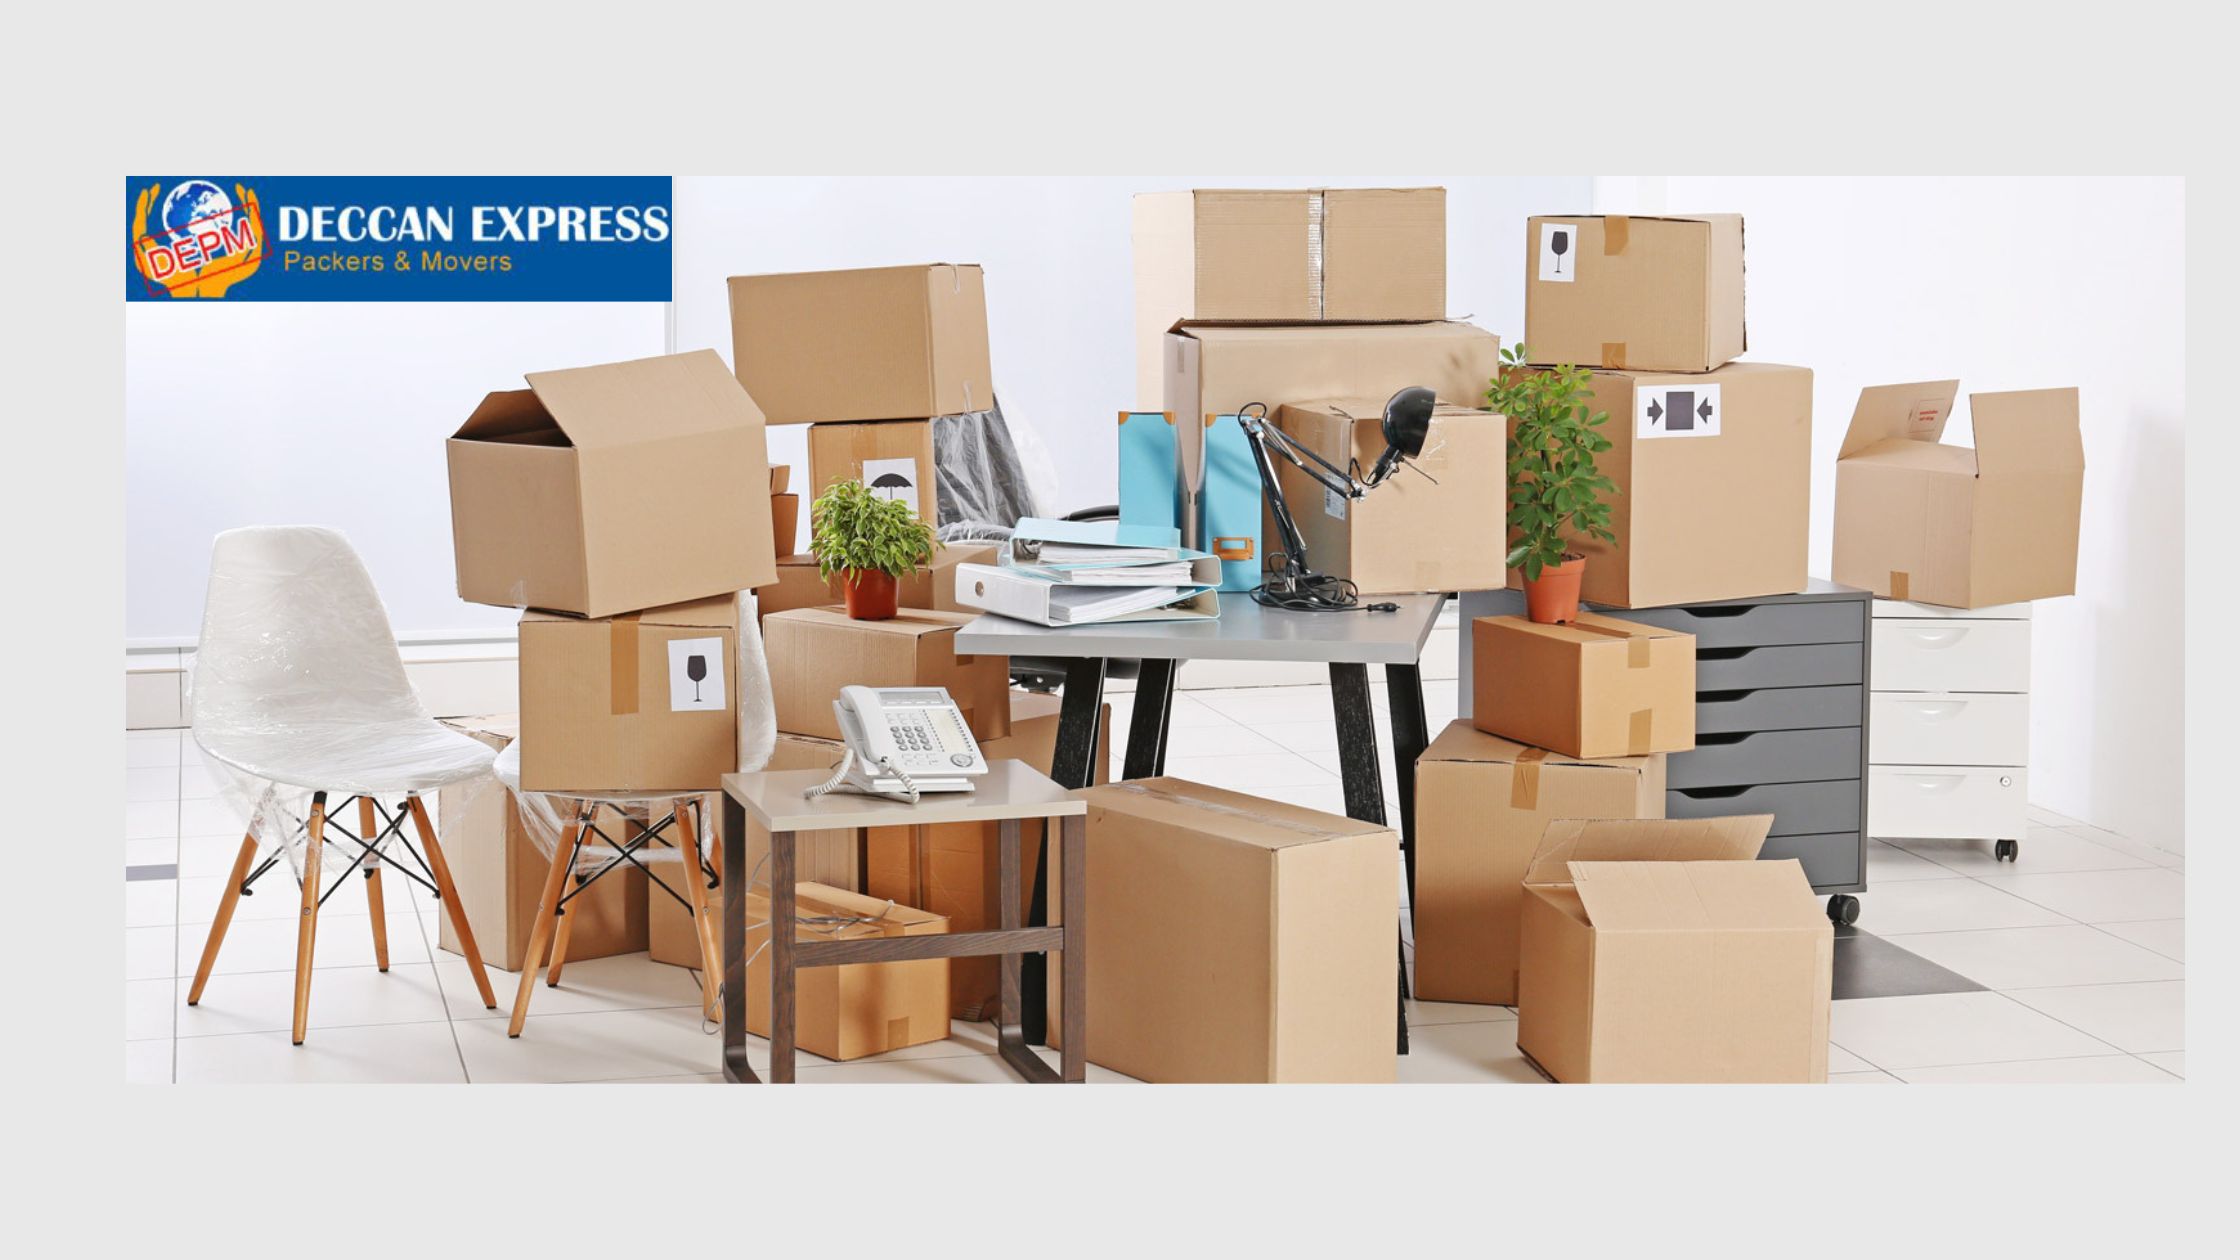 How do packers and movers pack fragile and delicate items?